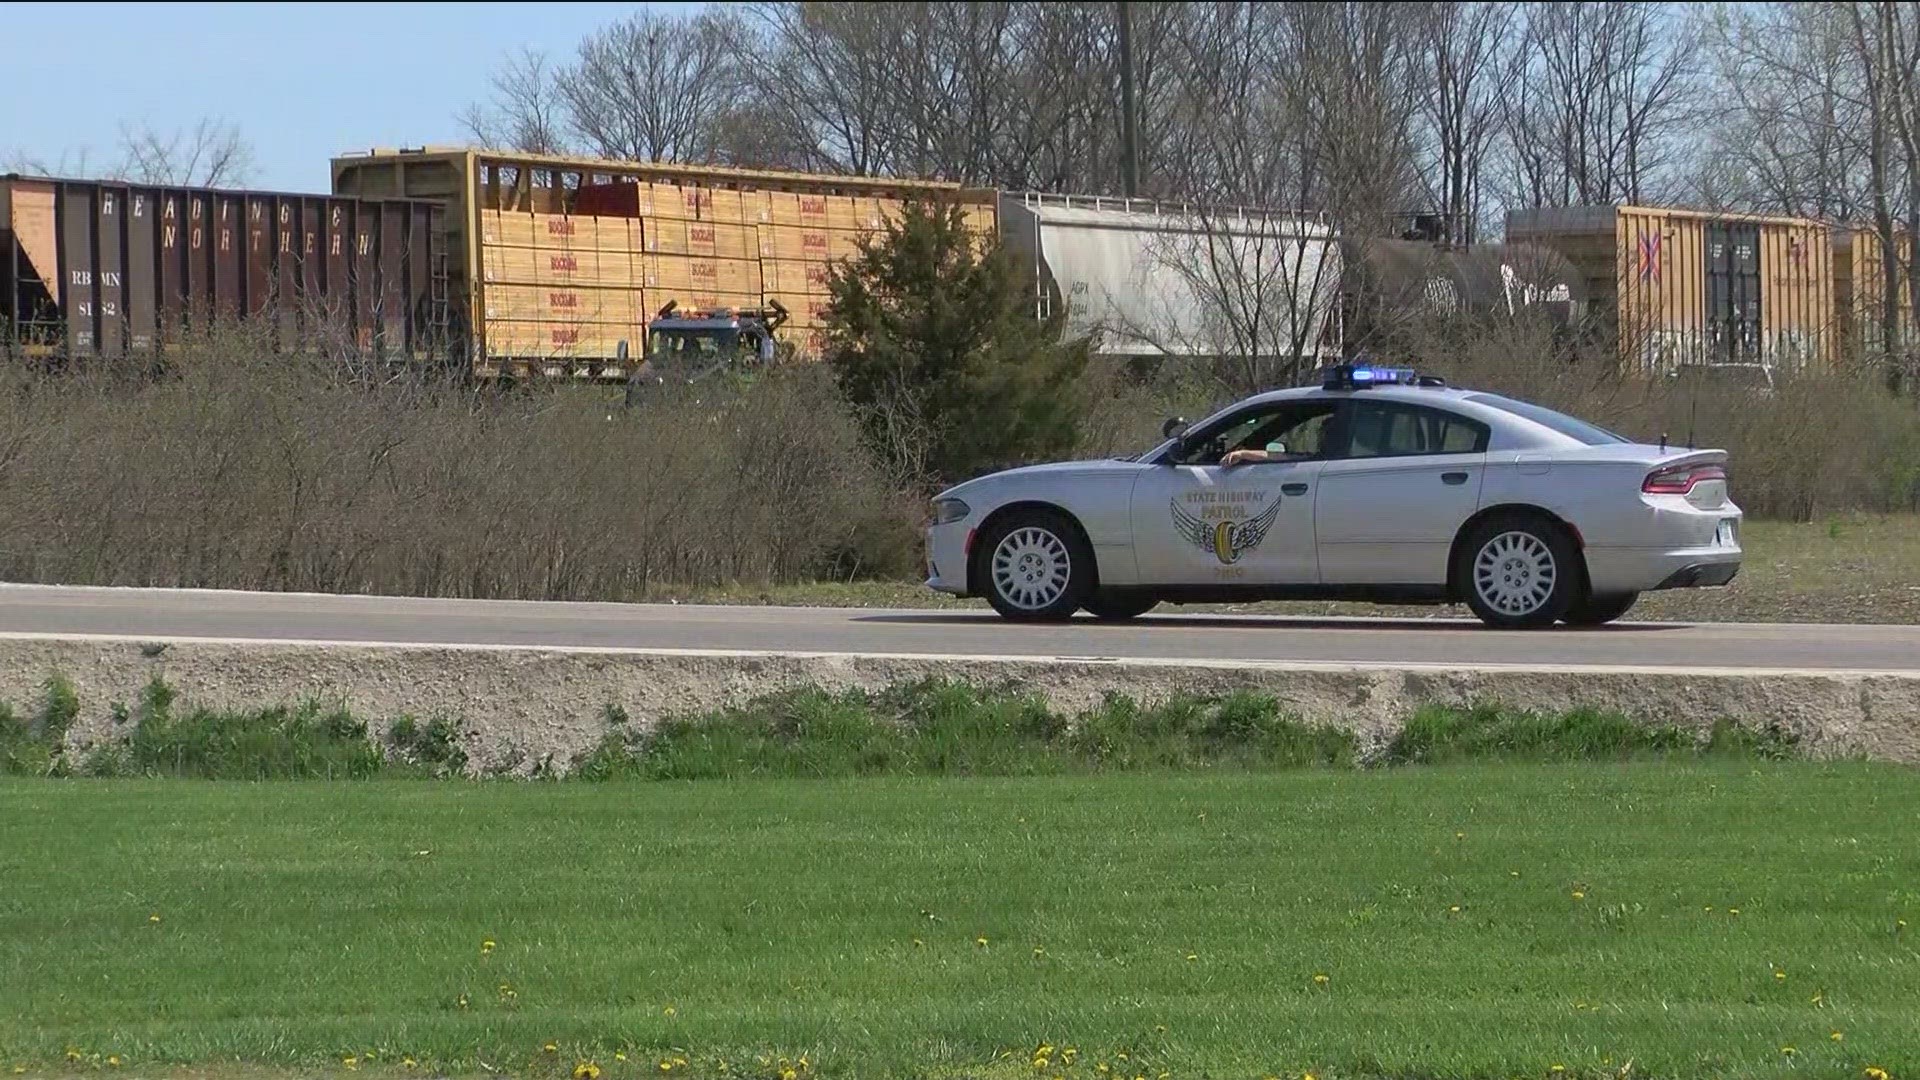 Ohio State Highway Patrol said the driver succumbed to their injuries.